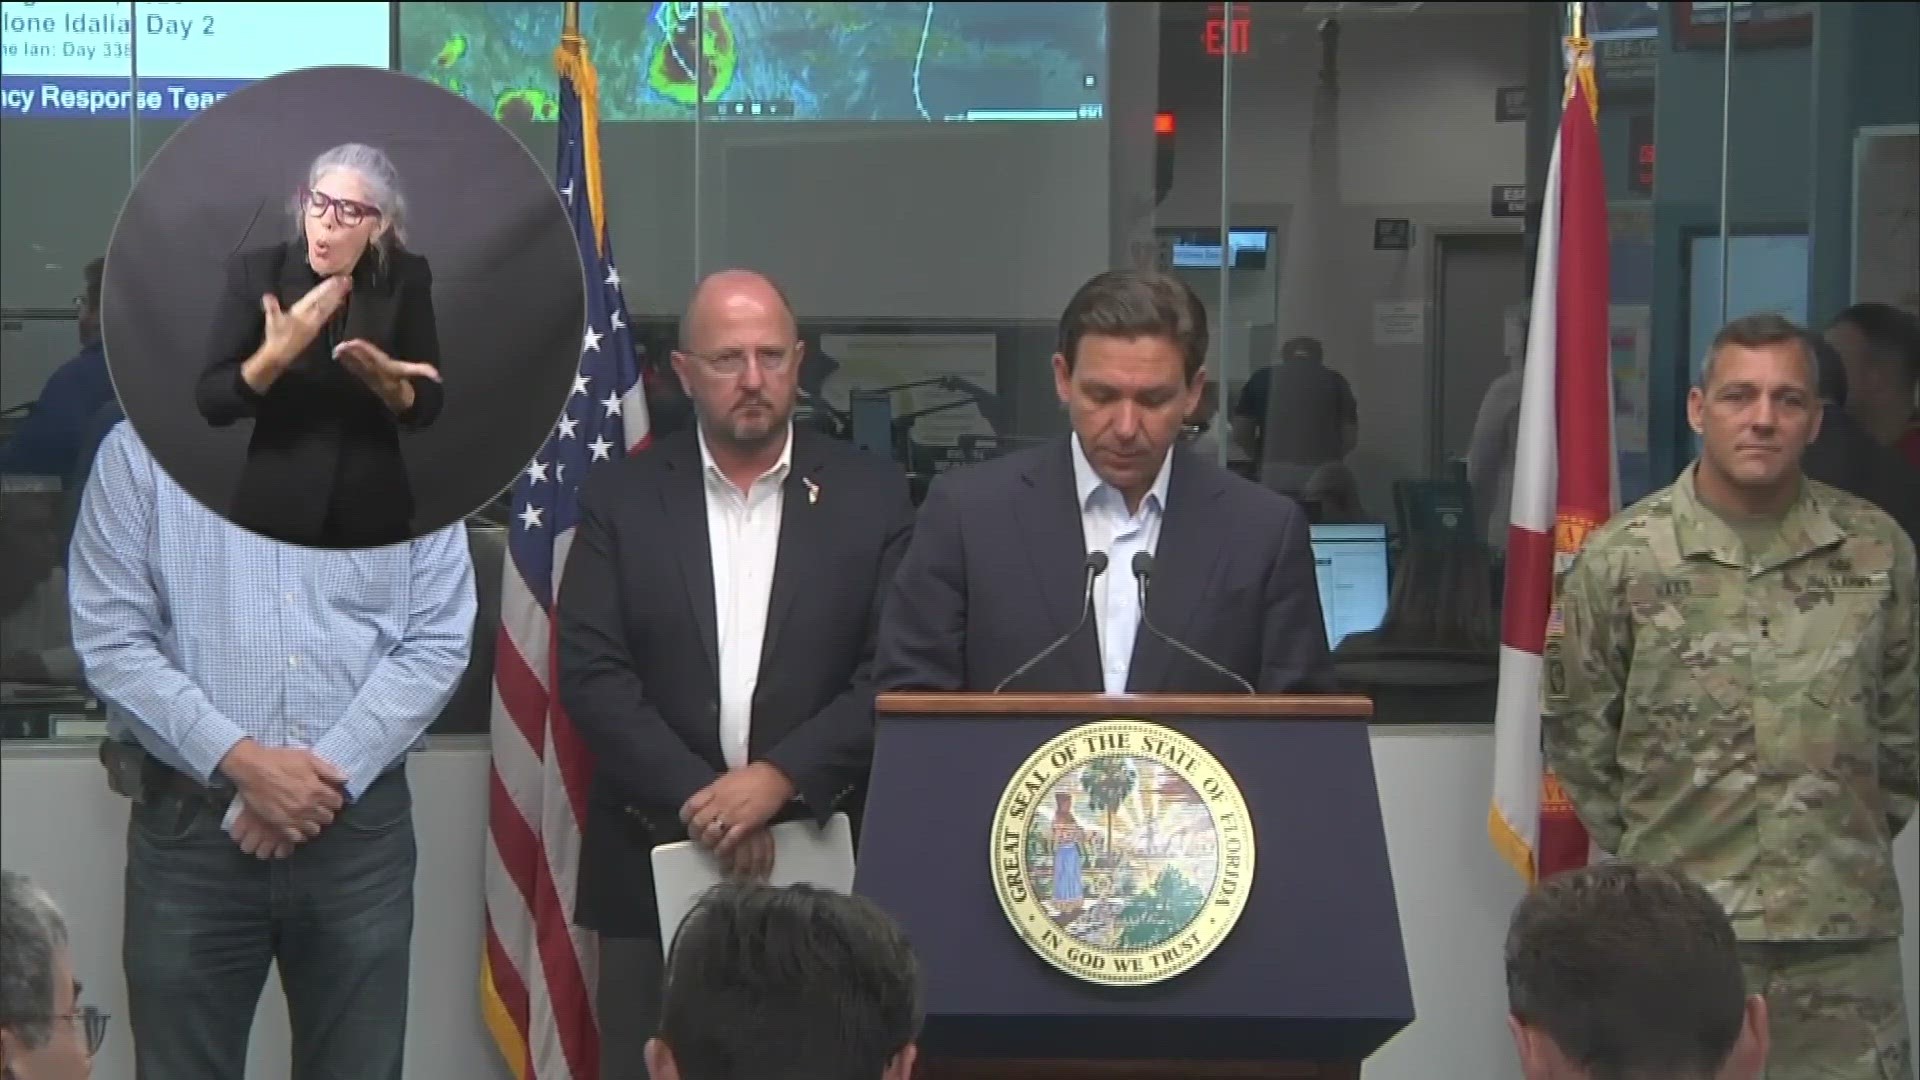 Gov. Ron DeSantis gives an update Monday morning on Florida's preparation for Idalia which is forecast to make landfall in the state as a Cat 2 or Cat 3 Hurricane.